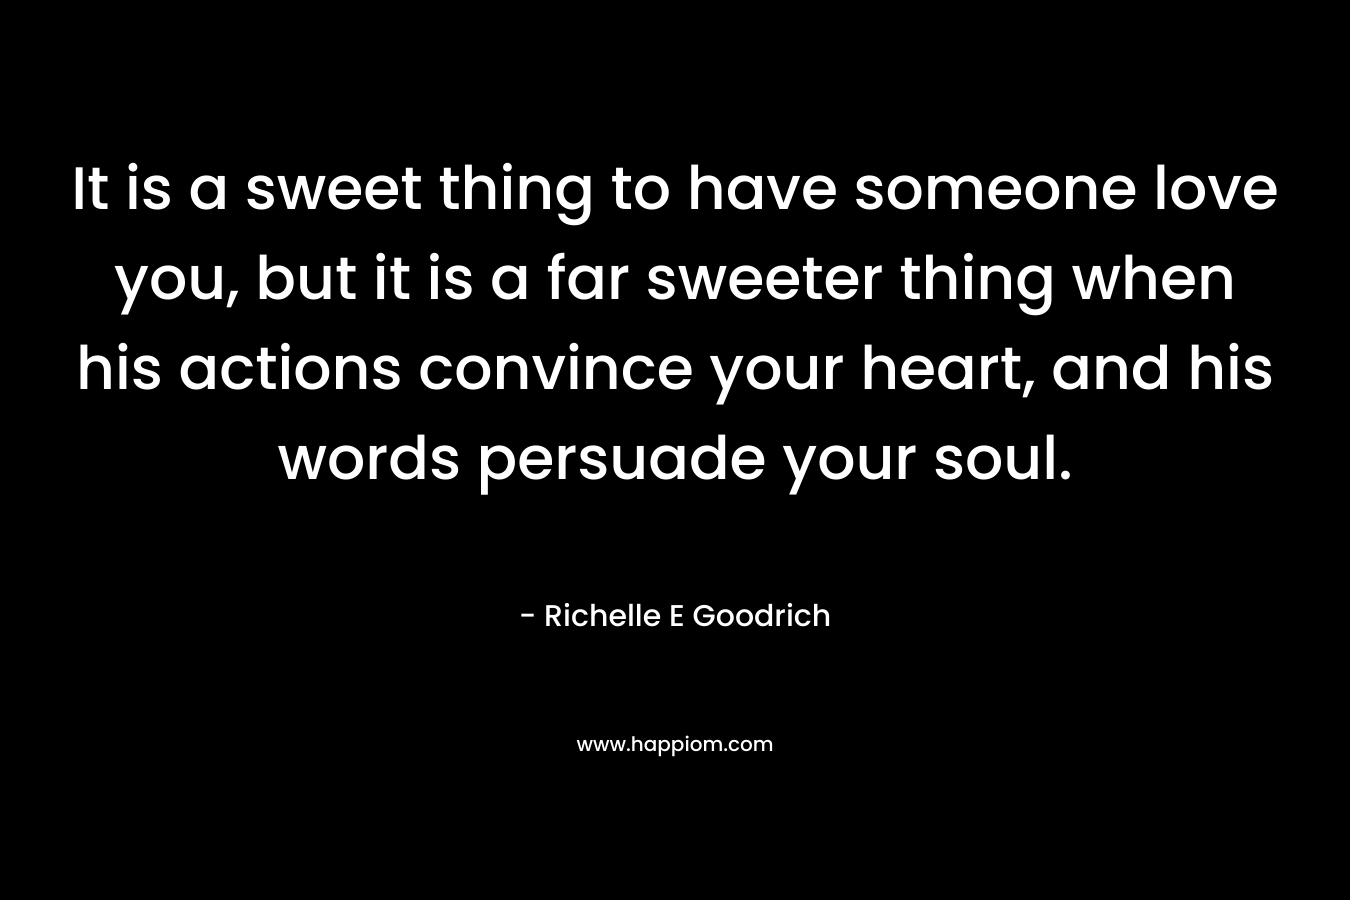 It is a sweet thing to have someone love you, but it is a far sweeter thing when his actions convince your heart, and his words persuade your soul. – Richelle E Goodrich